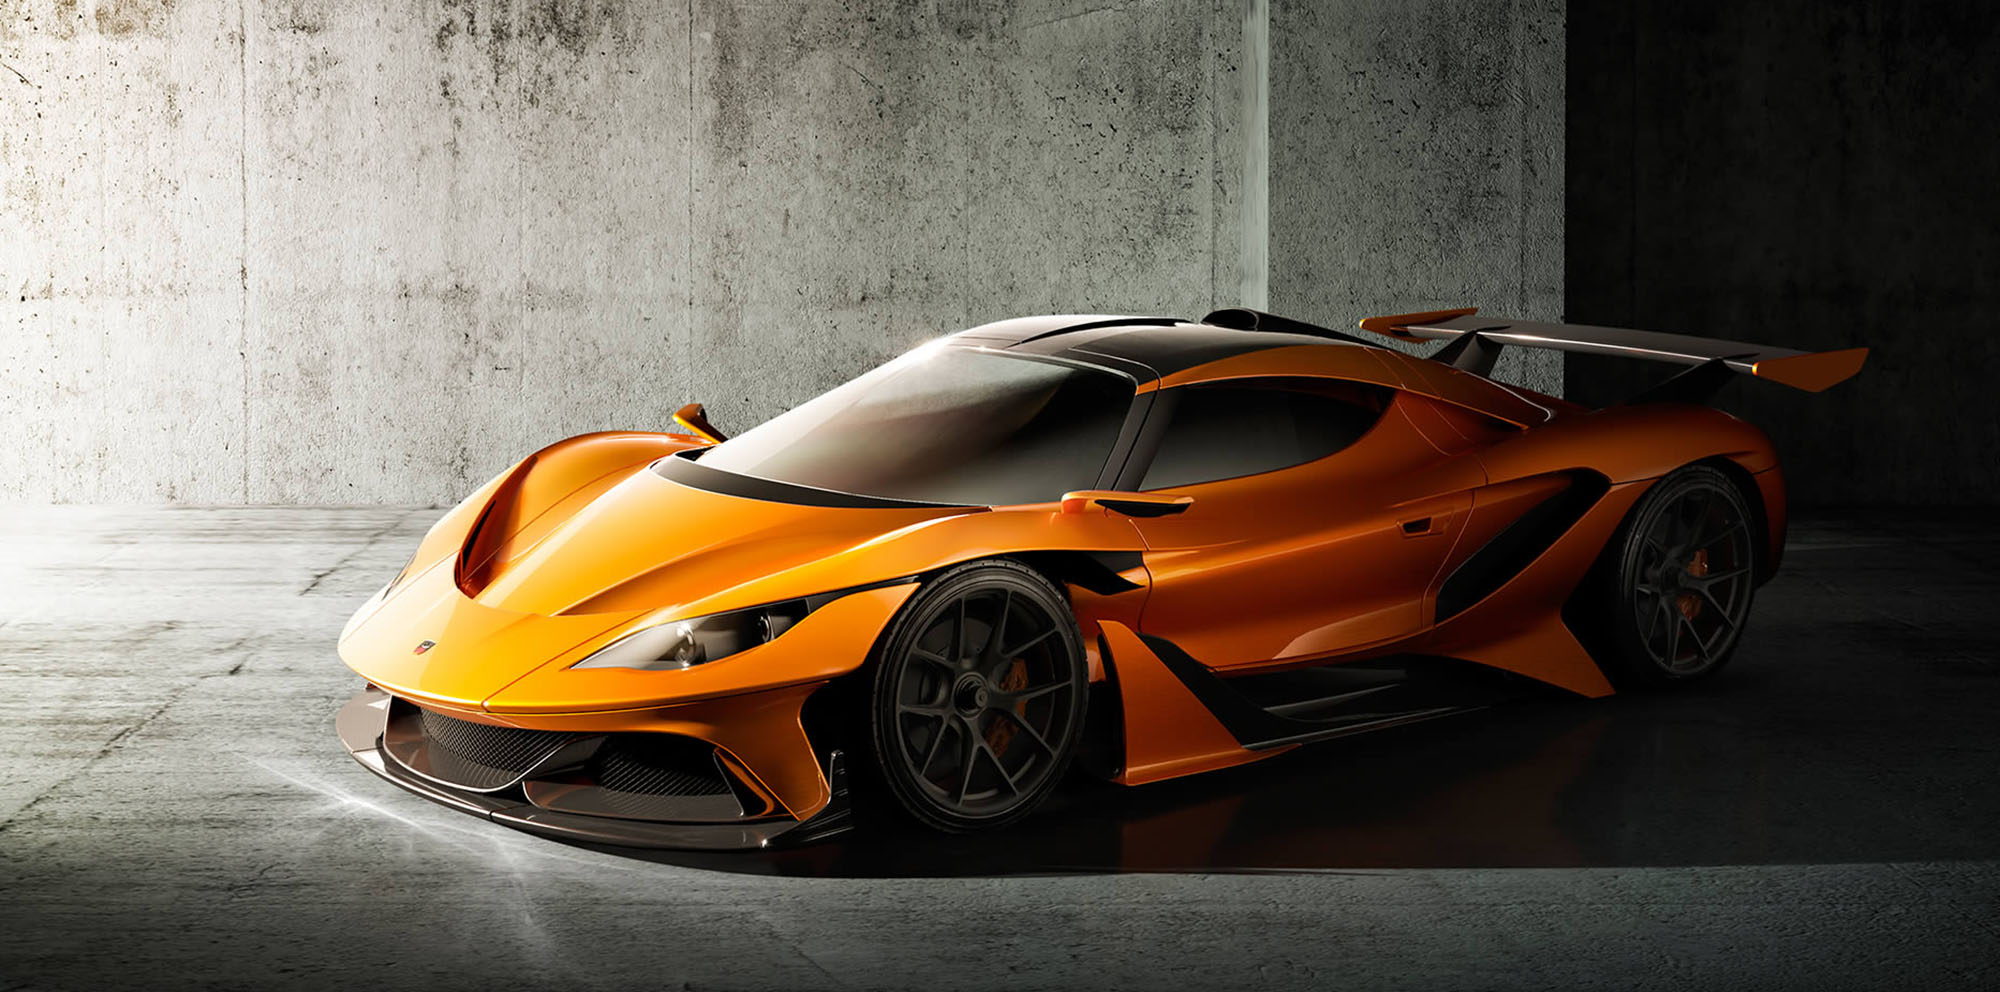 Apollo Arrow supercar First new supercar from revived 